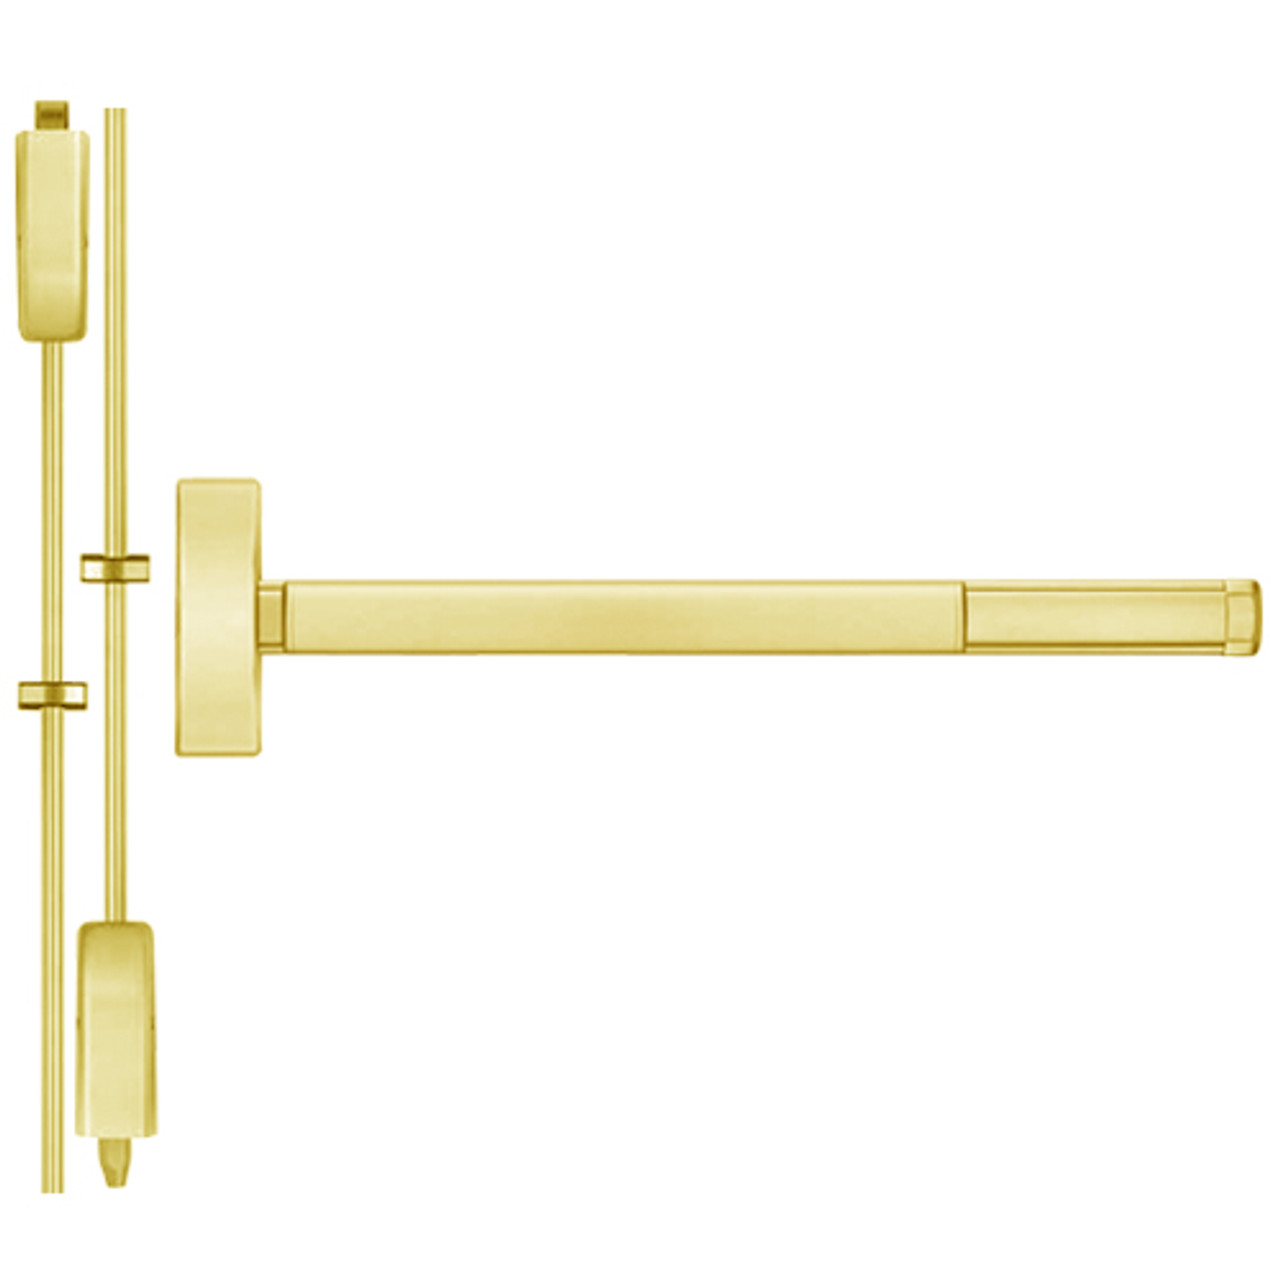 TSFL2203LBR-605-36 PHI 2200 Series Apex Surface Vertical Rod Device with Touchbar Monitoring Switch Prepped for Key Retracts Latchbolt in Bright Brass Finish